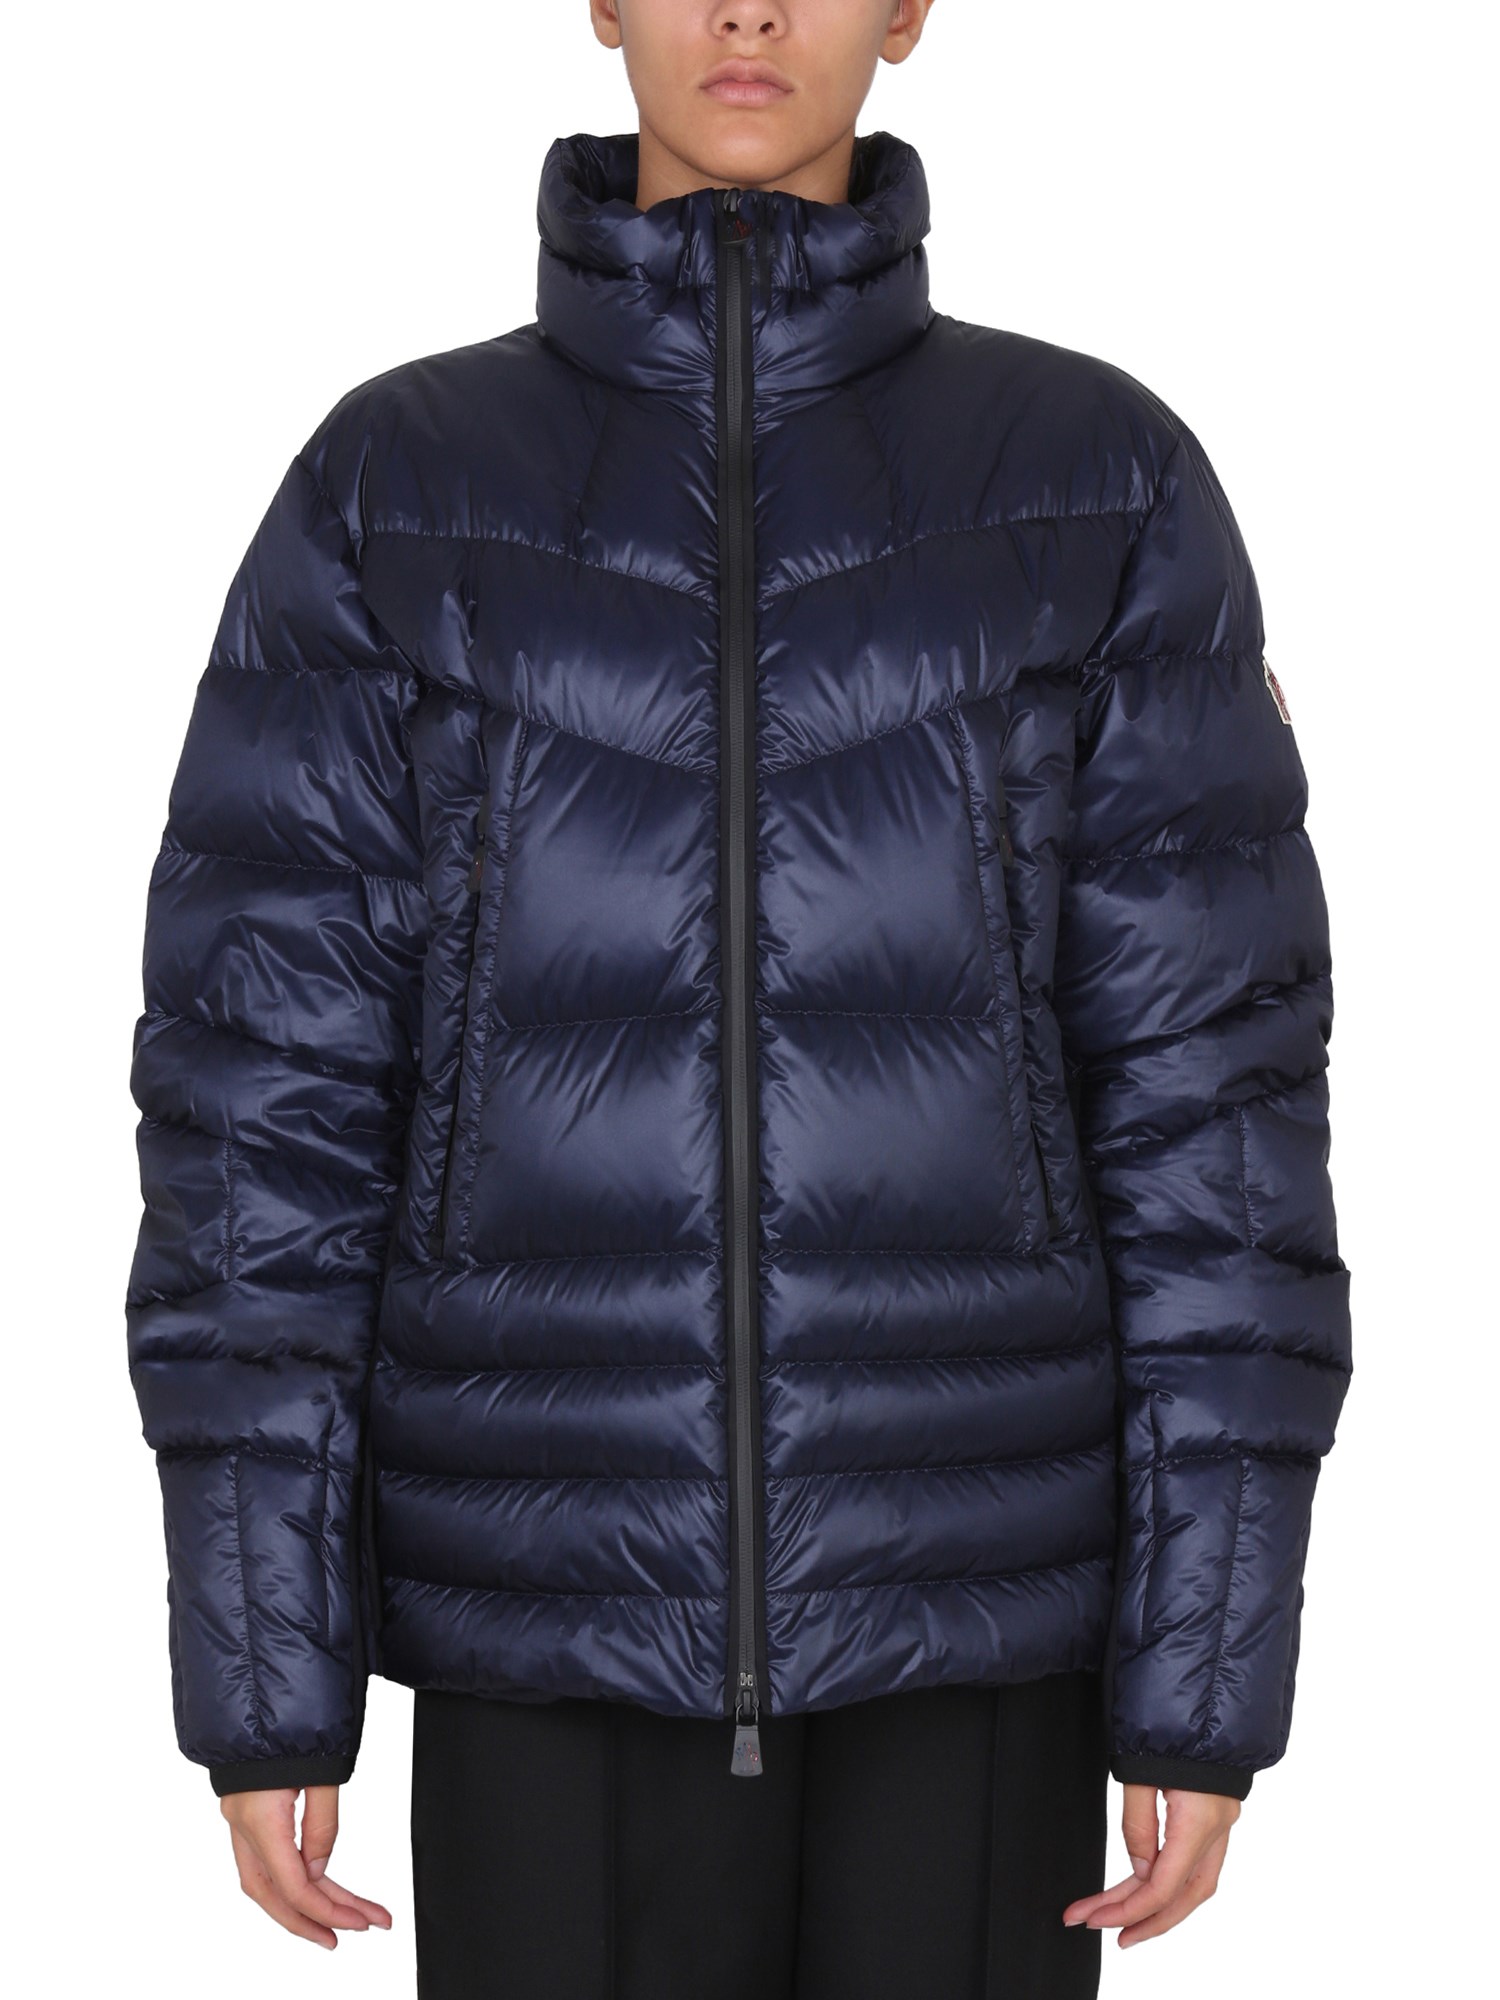 Moncler Grenoble moncler grenoble "canmore" jacket